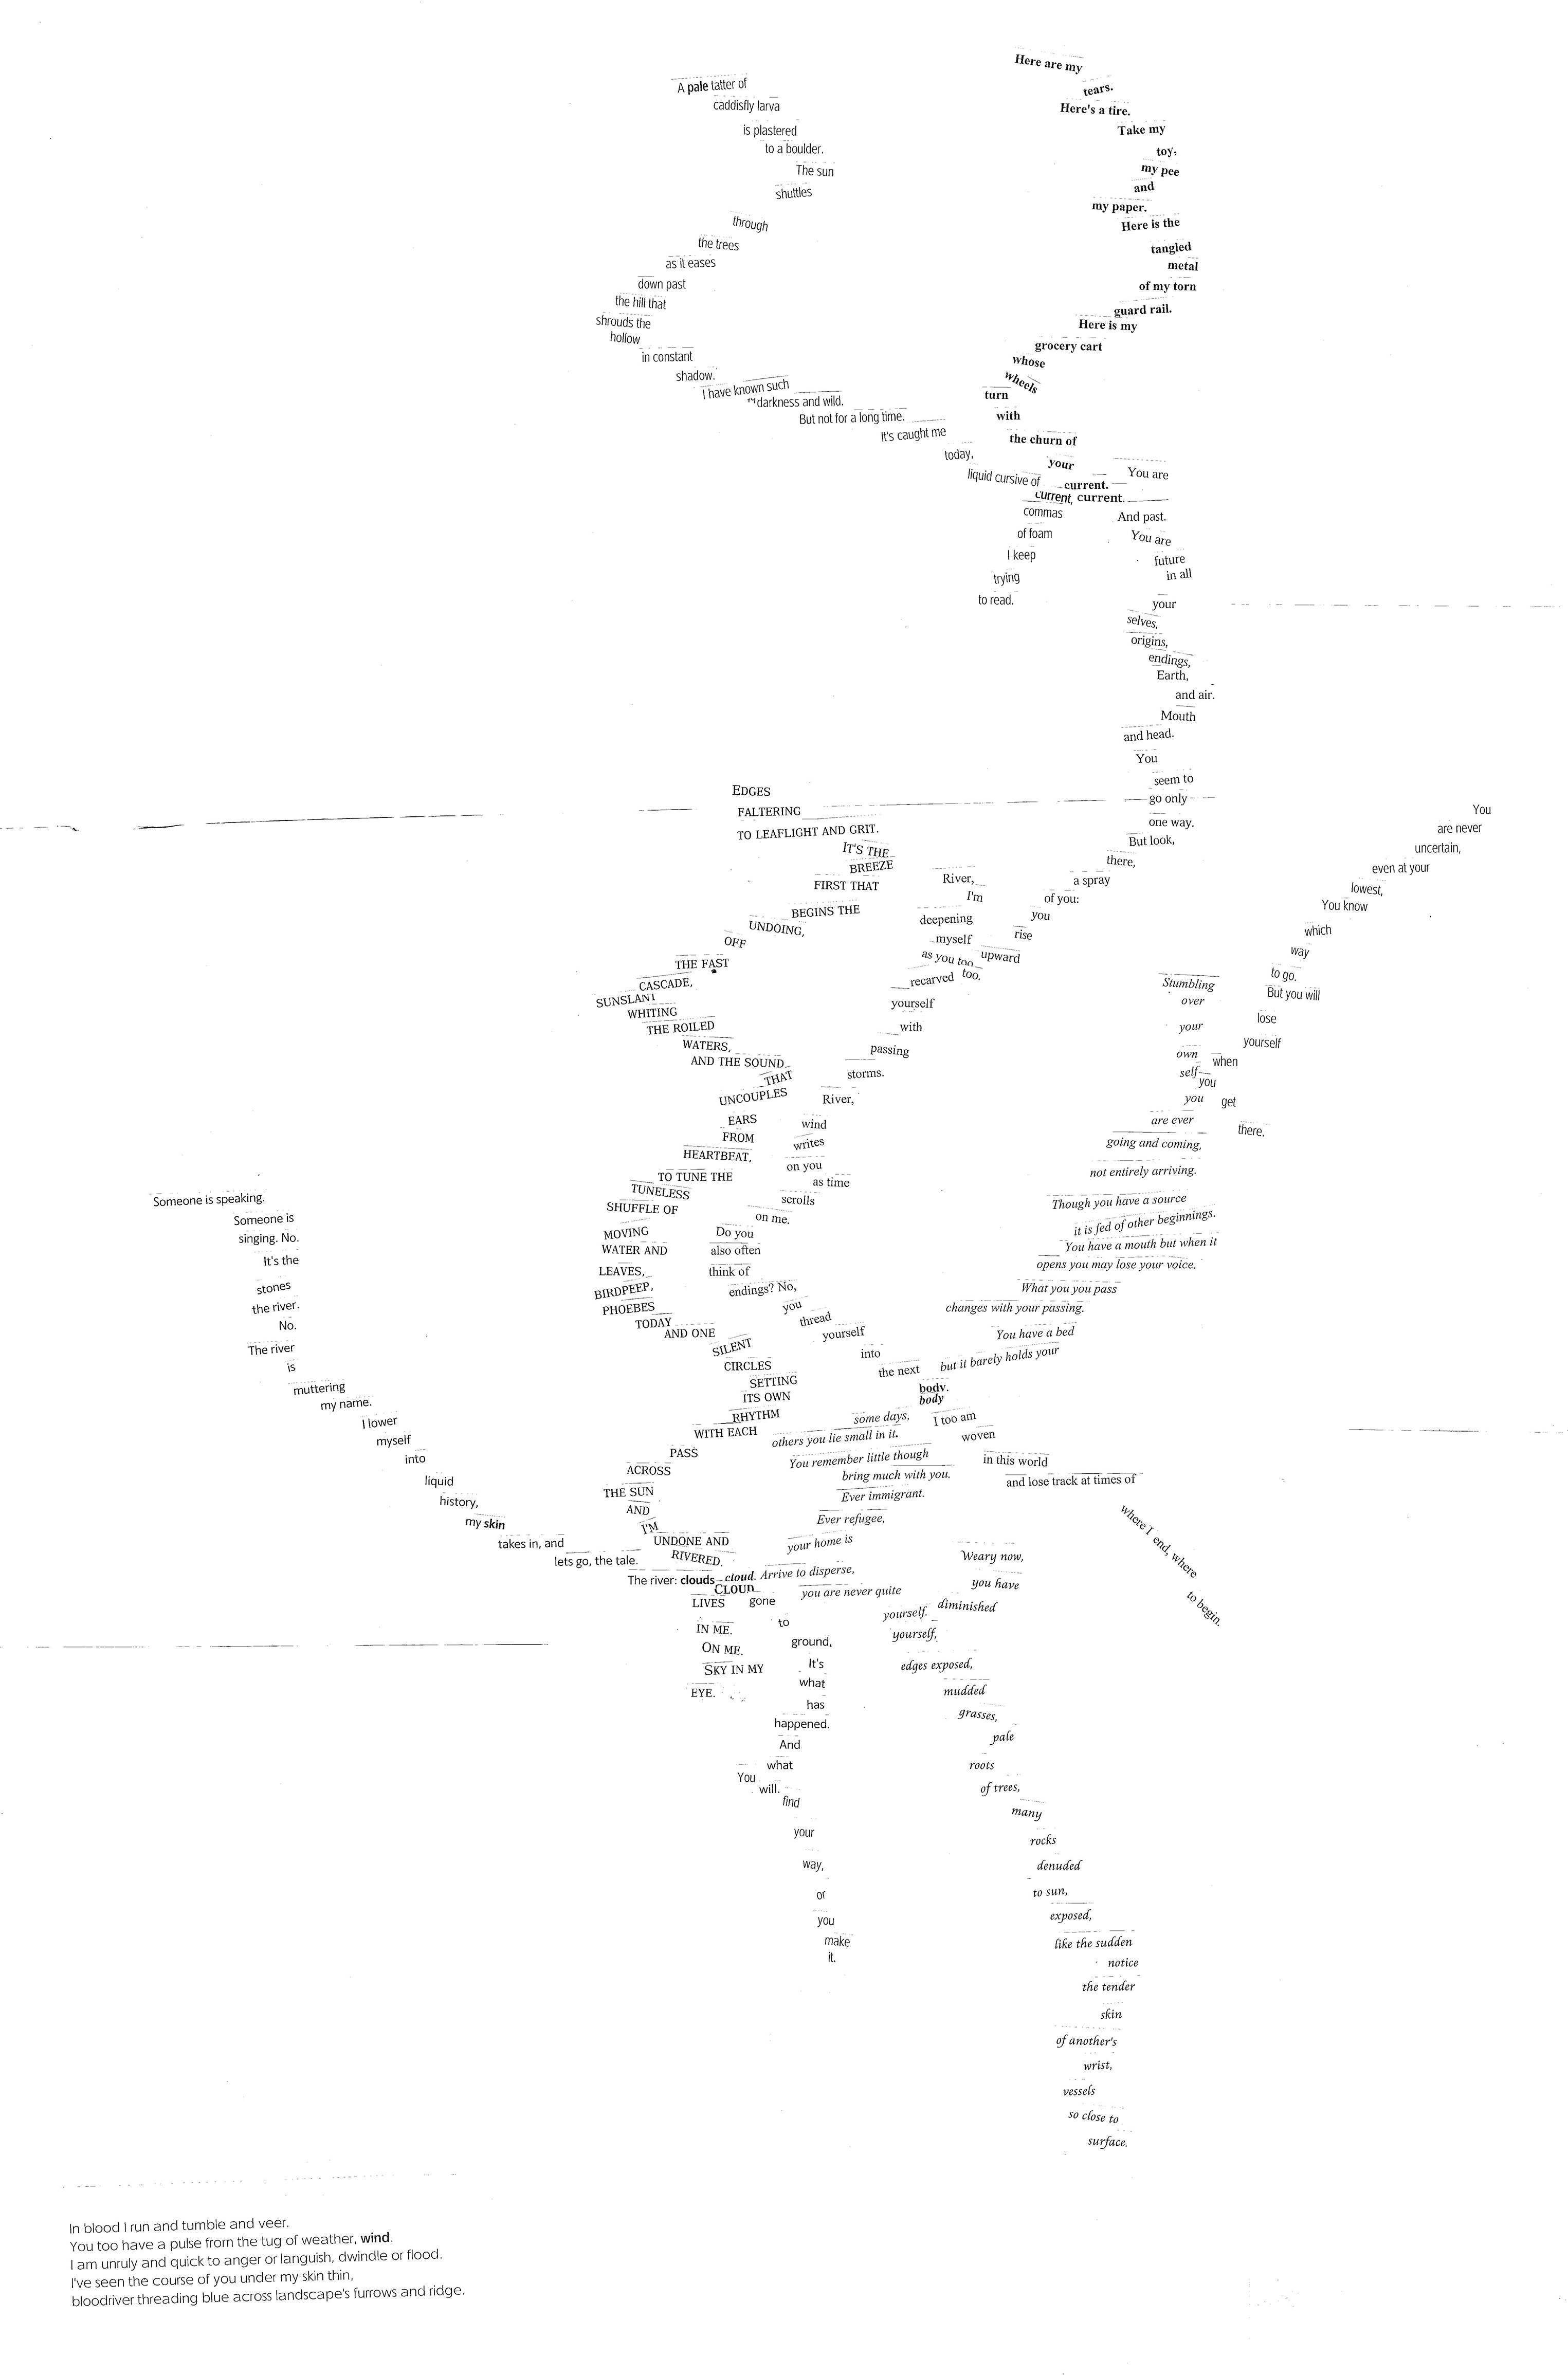 a visual poem resembling branching rivers. black text on white background.